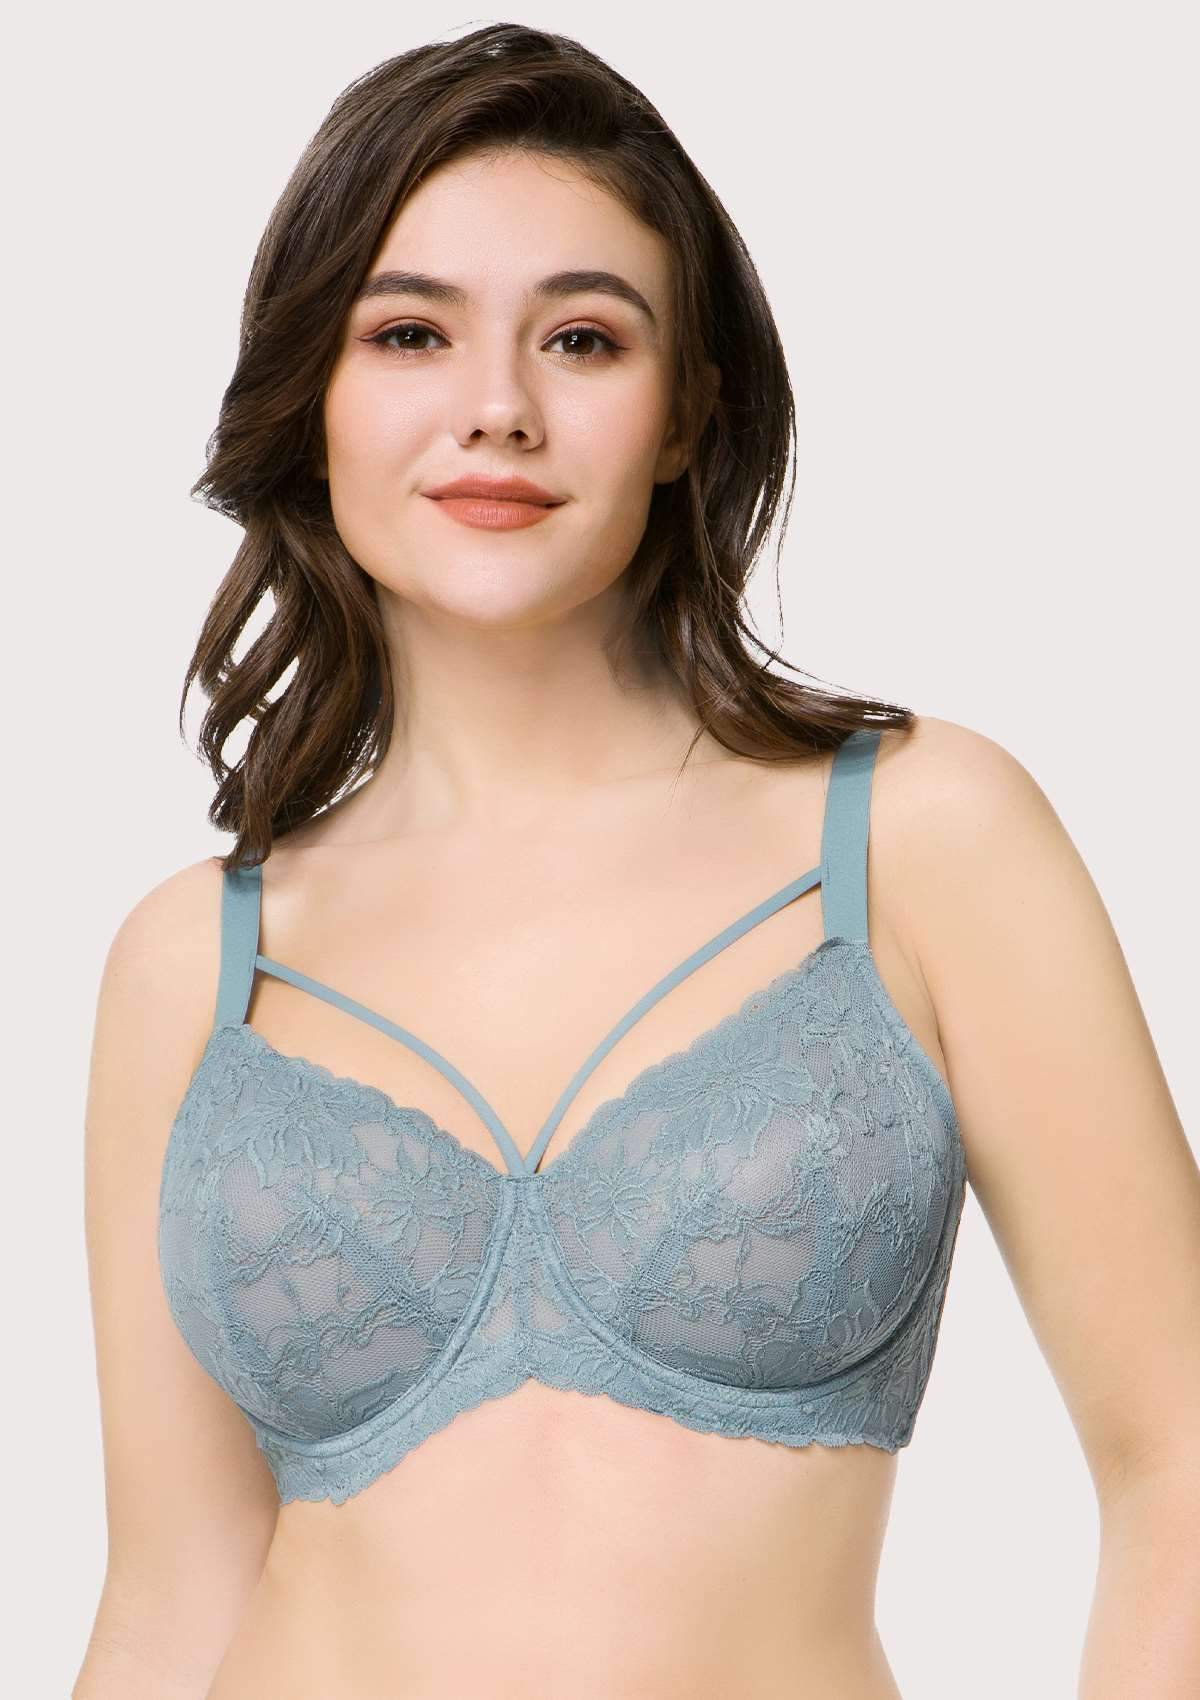 HSIA Pretty In Petals Unlined Lace Bra: Comfortable And Supportive Bra - Crystal Blue / 36 / C